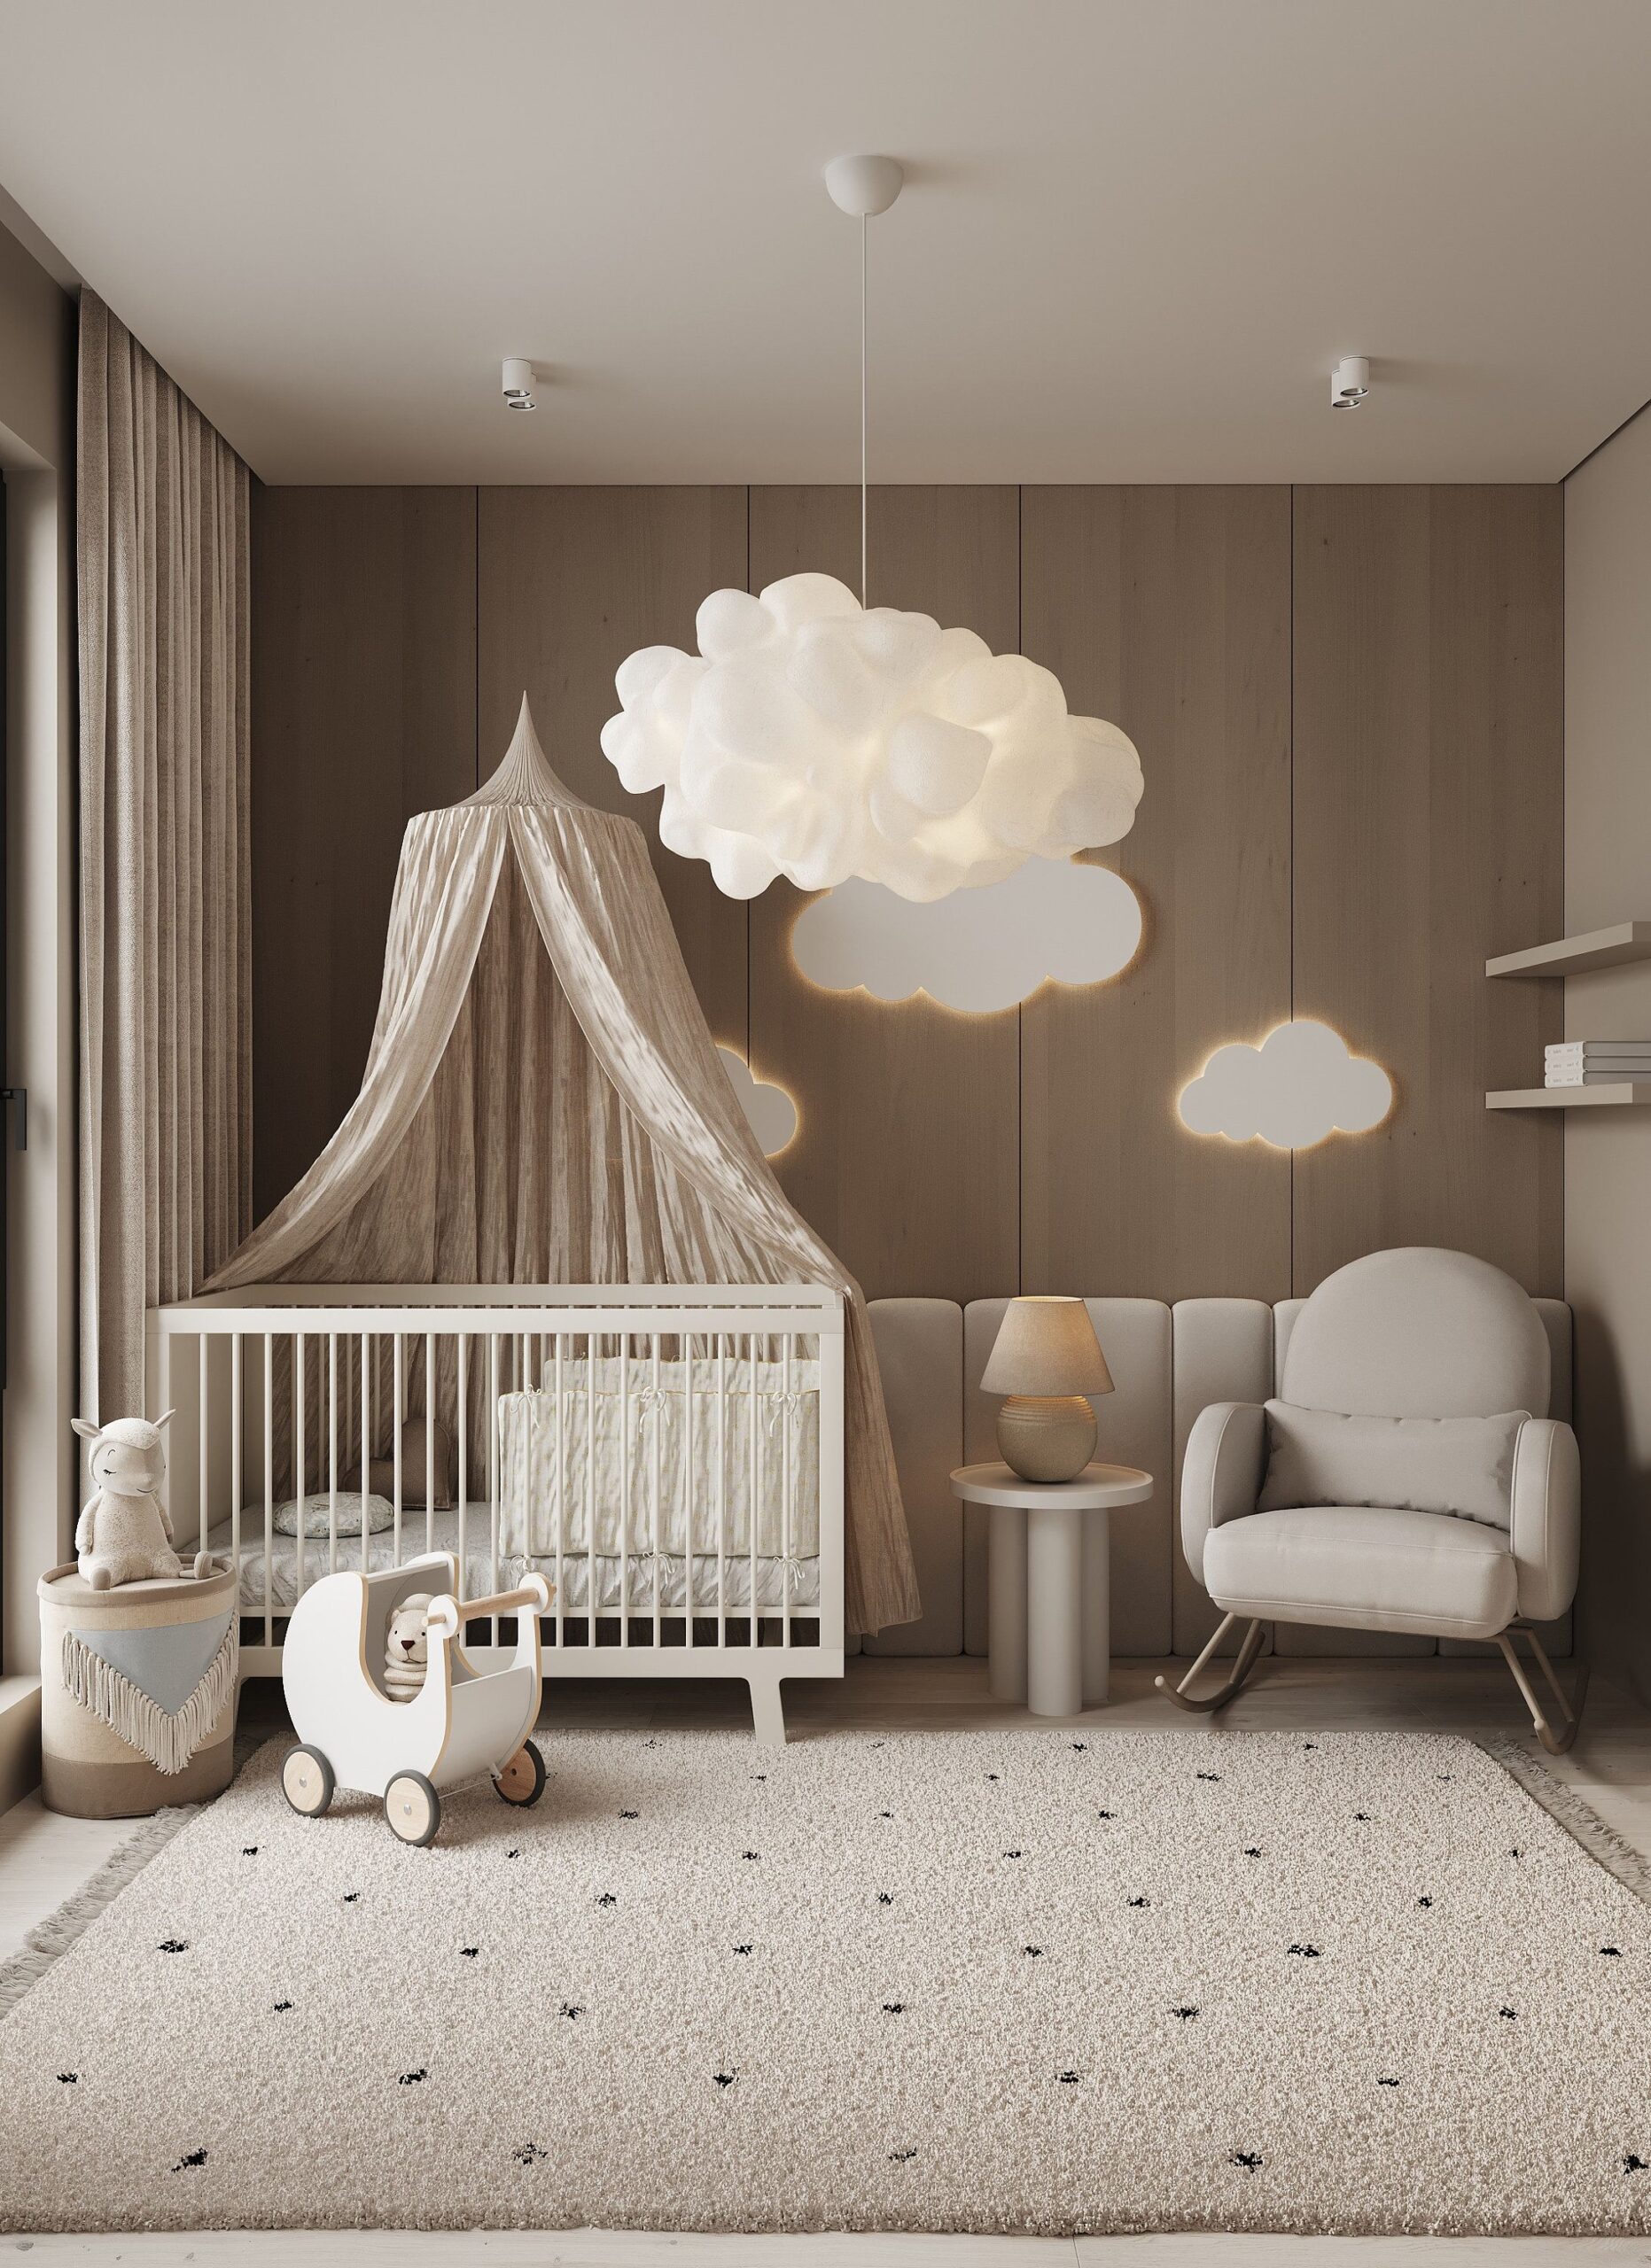 Baby Room Design Creating a Cozy and Stylish Nursery for Your Little One